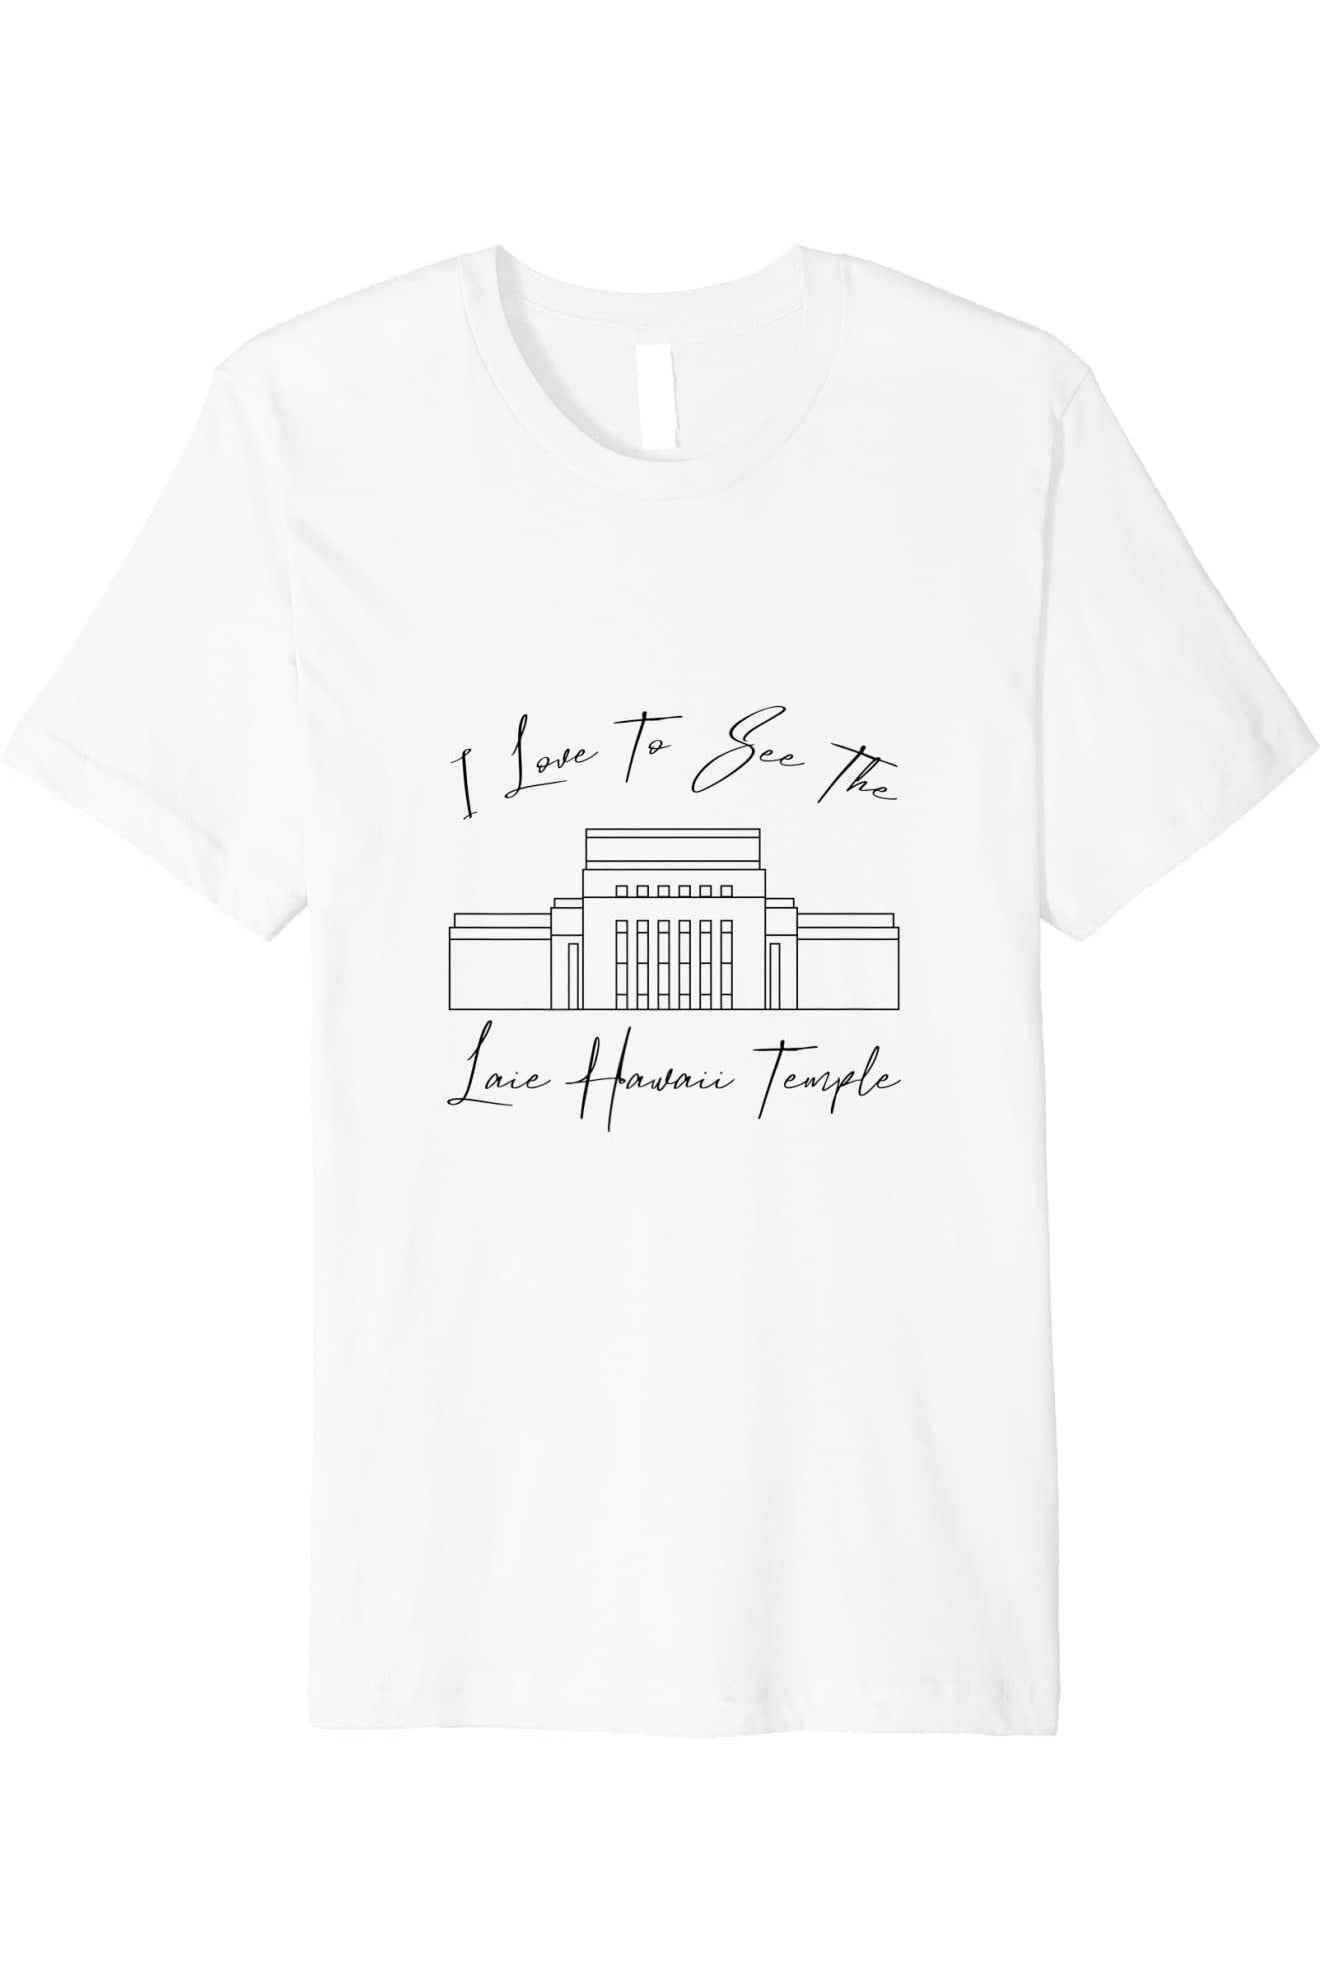 Laie Hawaii Temple T-Shirt - Premium - Calligraphy Style (English) US